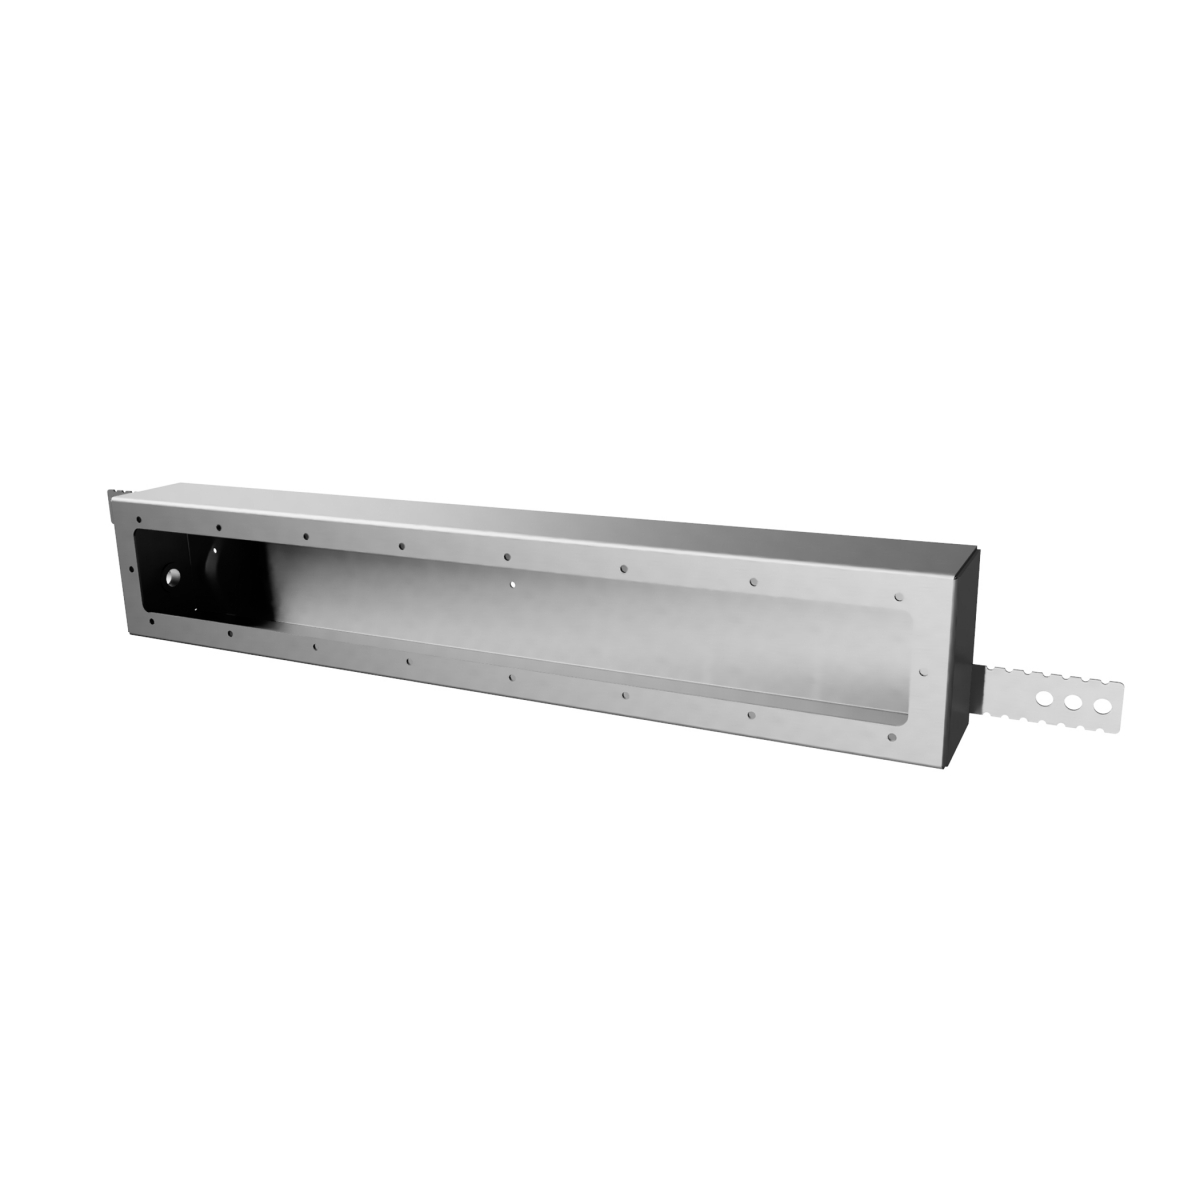 Ocean®wall conduit for under water light „Rectangular“, incl. fastening tabs for easy installation Ocean®wall conduit for under water light „Rectangular“, incl. fastening tabs for easy installation